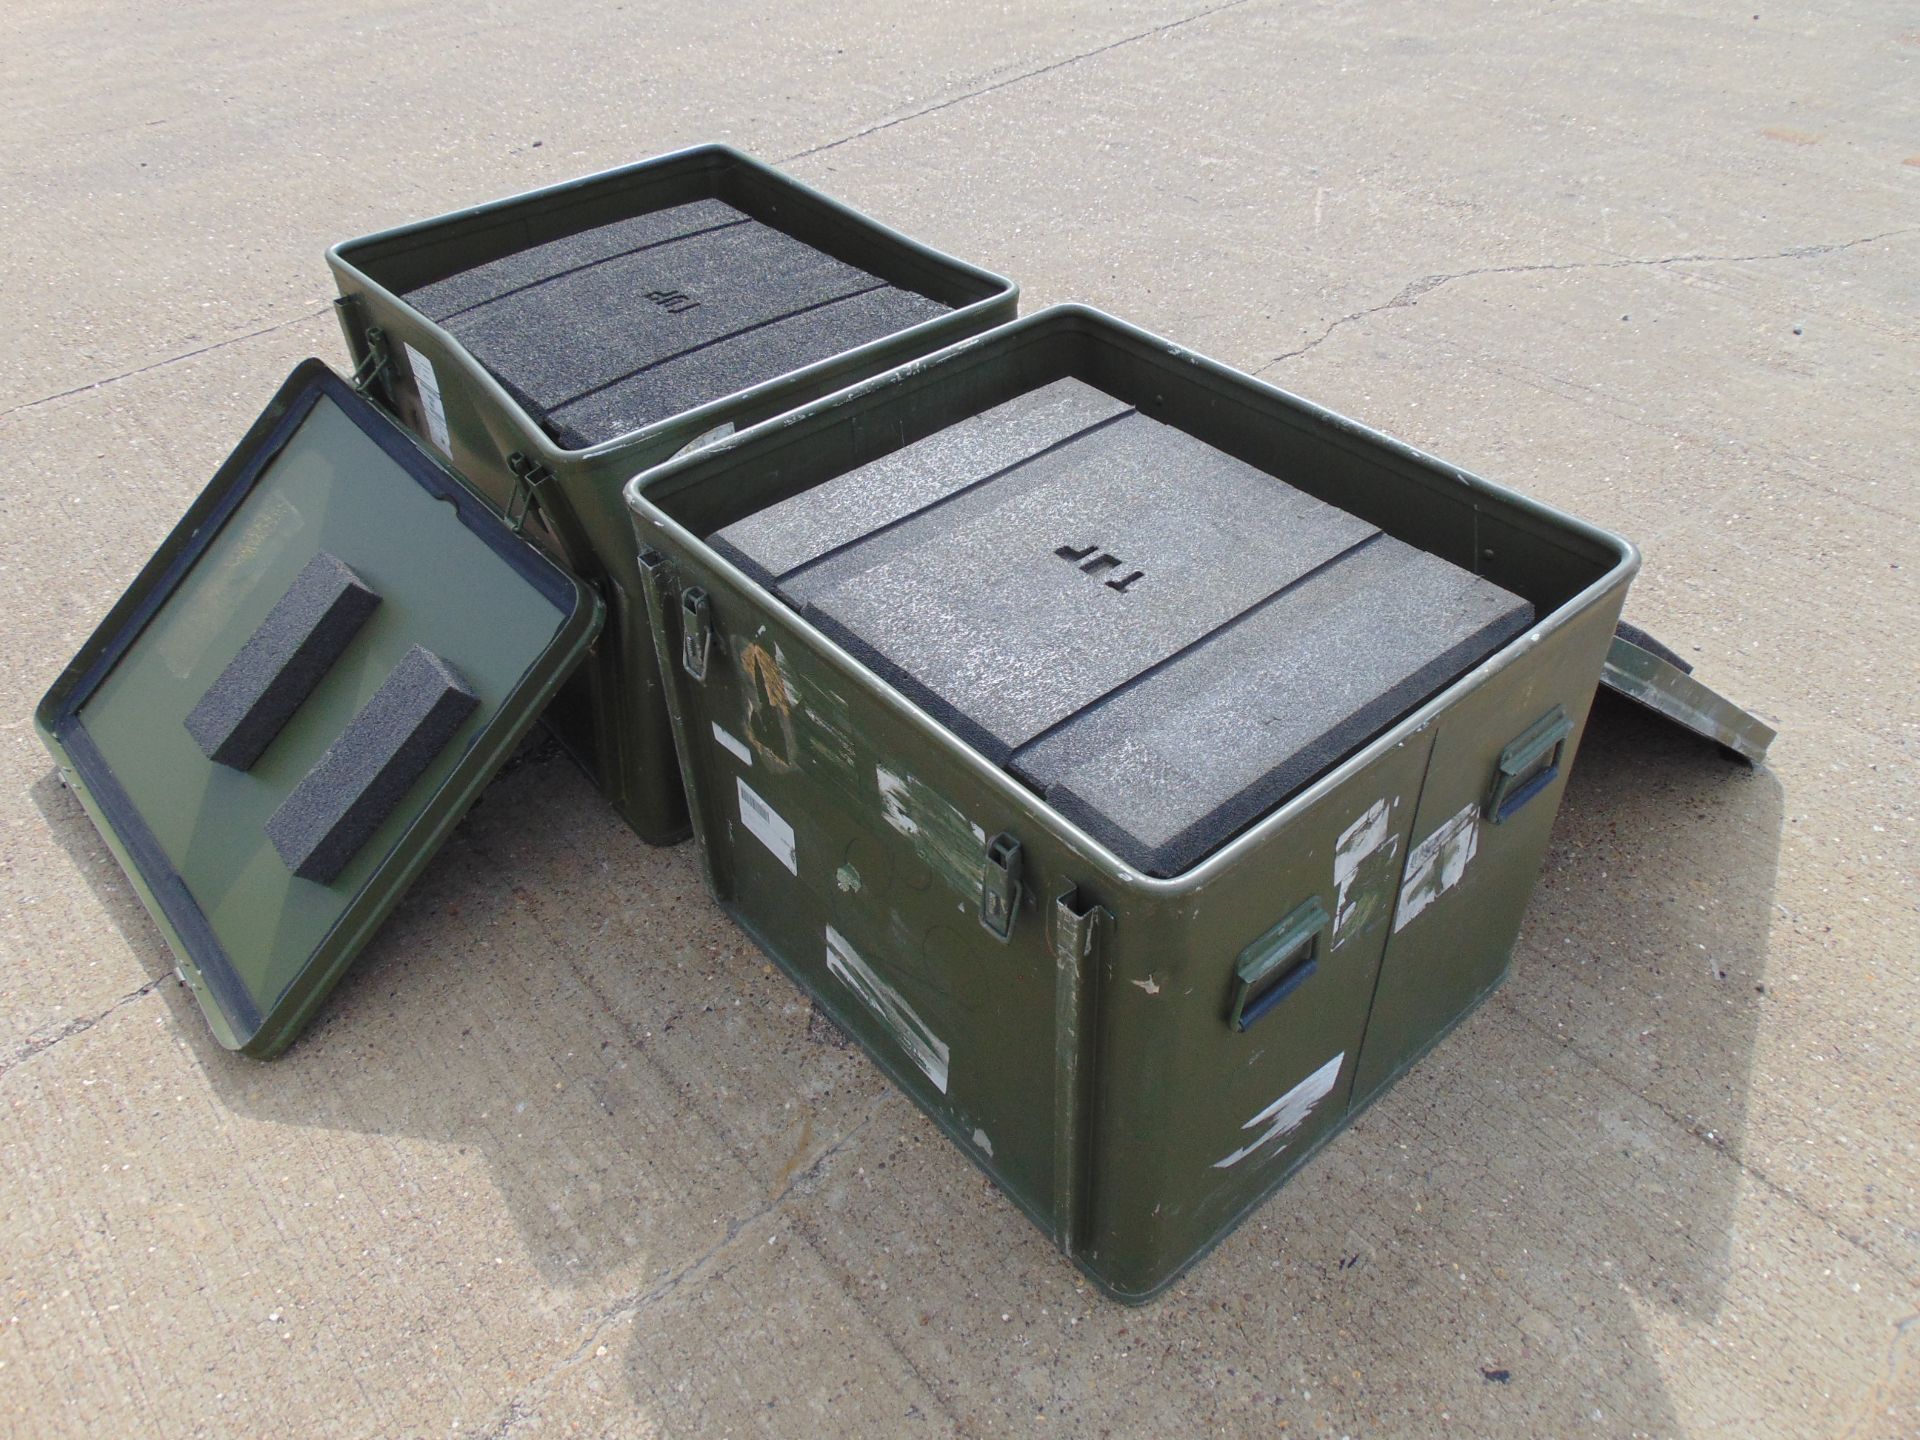 2 x Large Aluminium Storage Boxes 78 x 65 x 60 cms as shown - Image 4 of 4